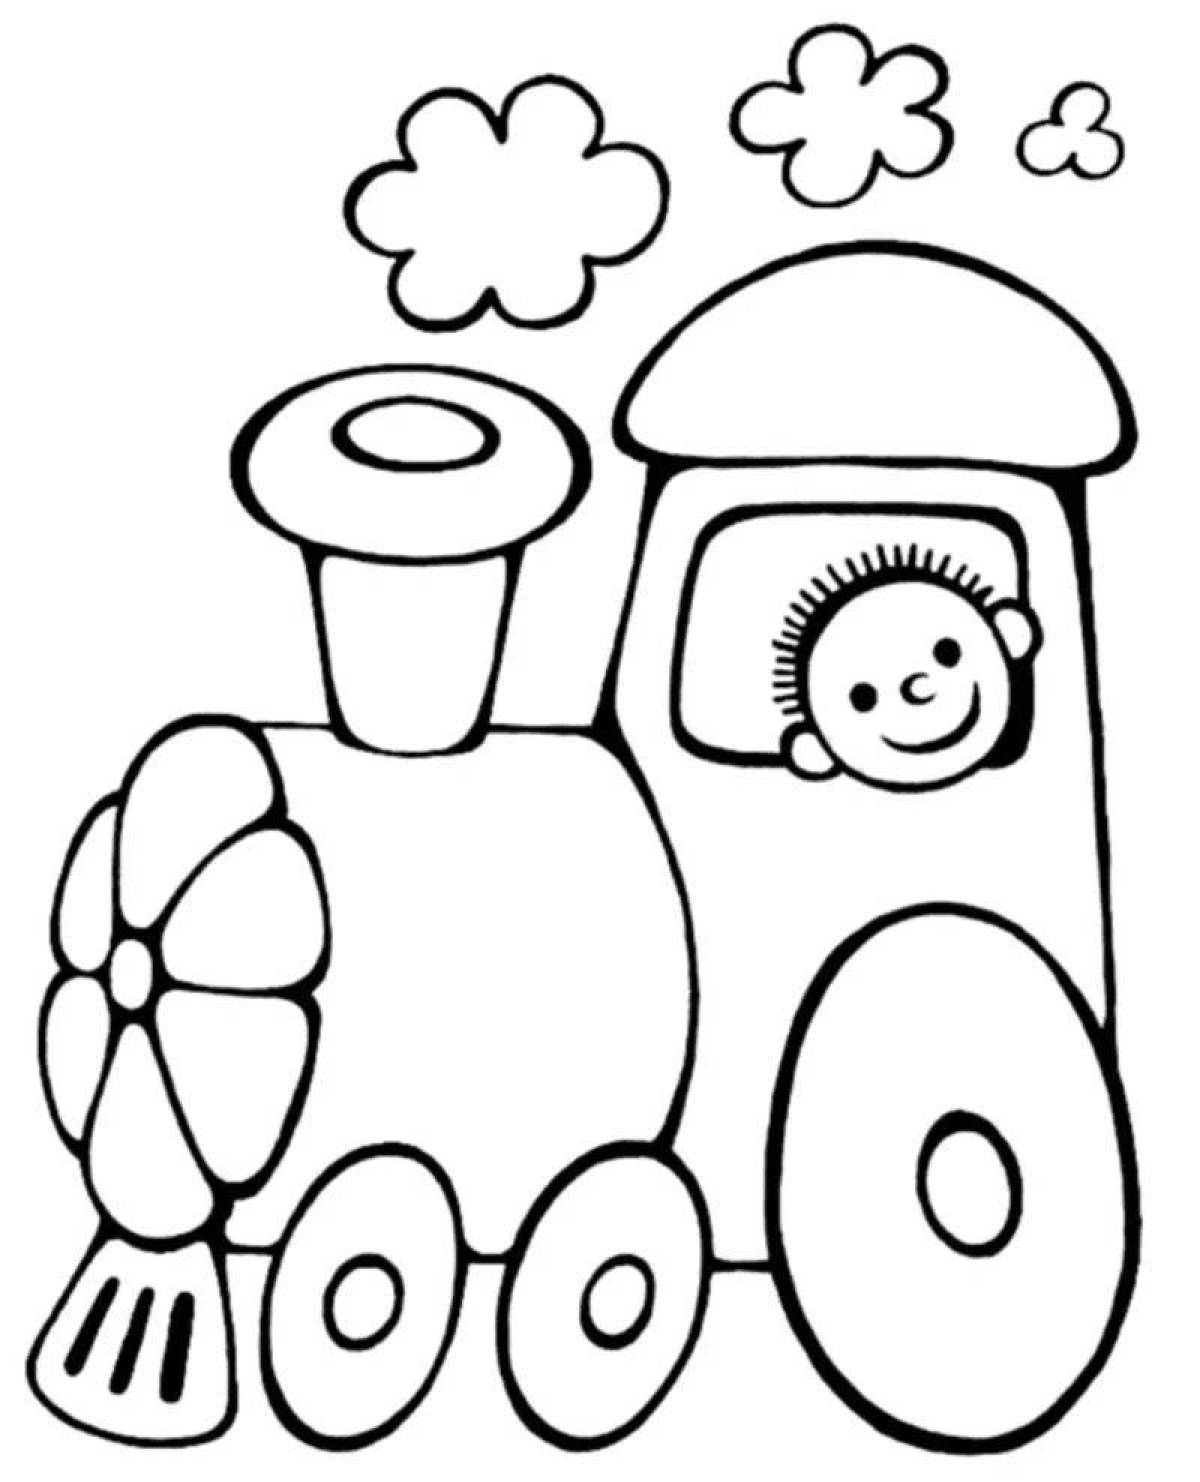 Charming coloring page 2 junior group